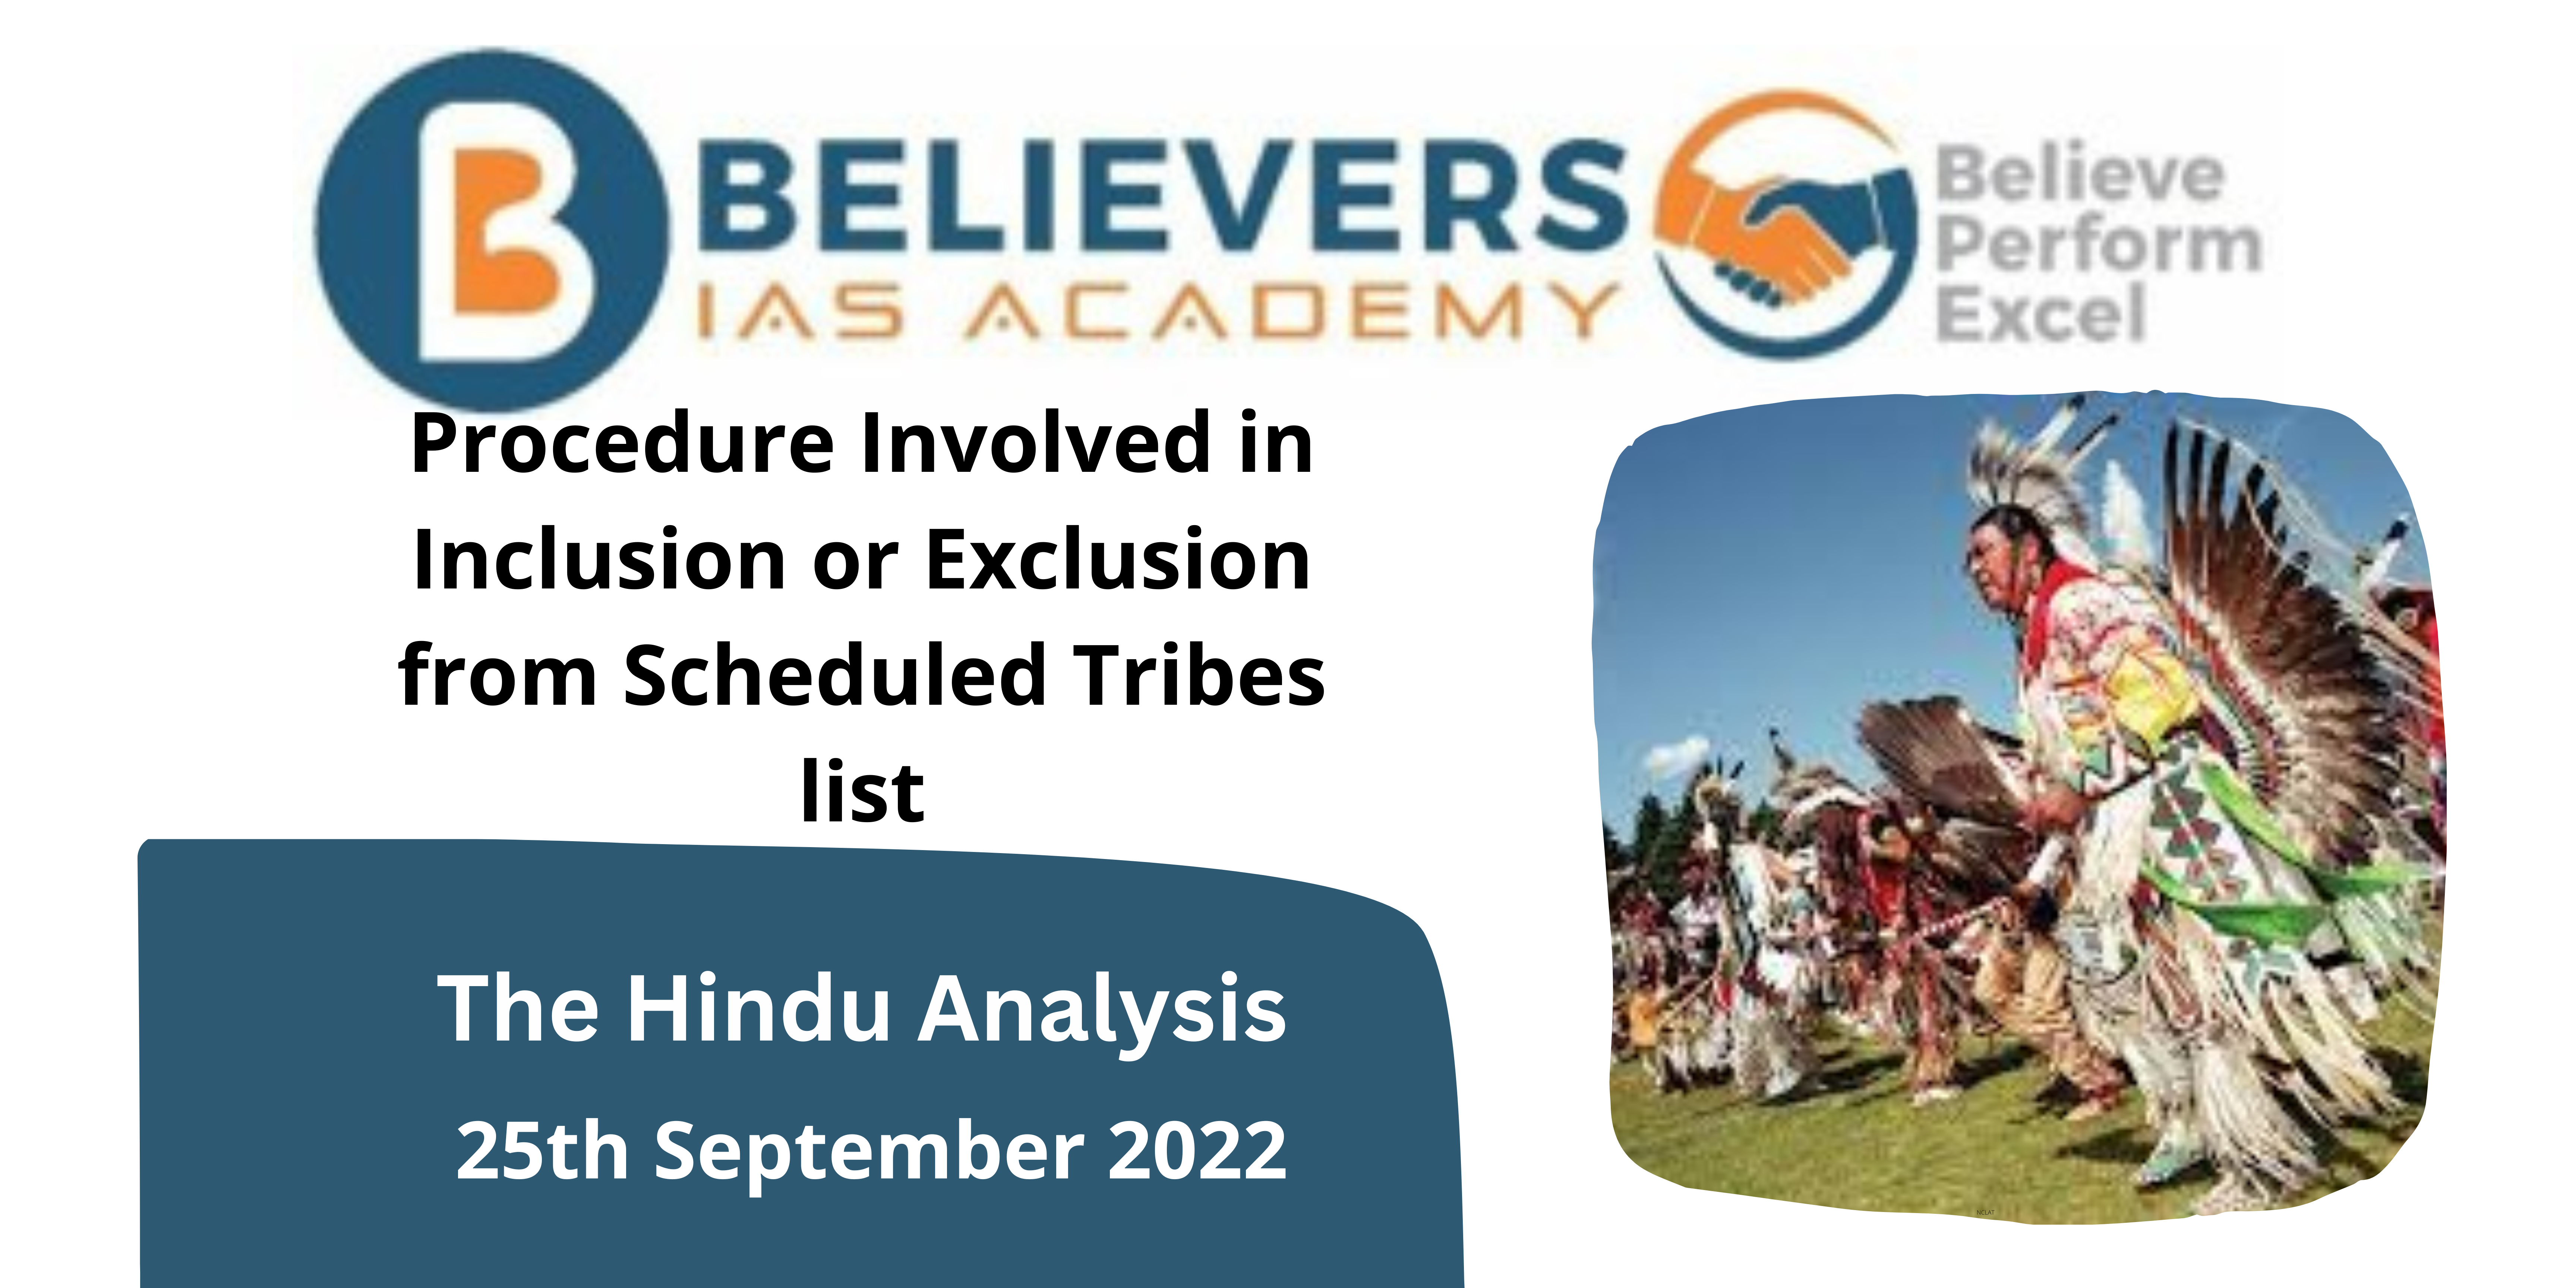 Procedure Involved in Inclusion or Exclusion from Scheduled Tribes list